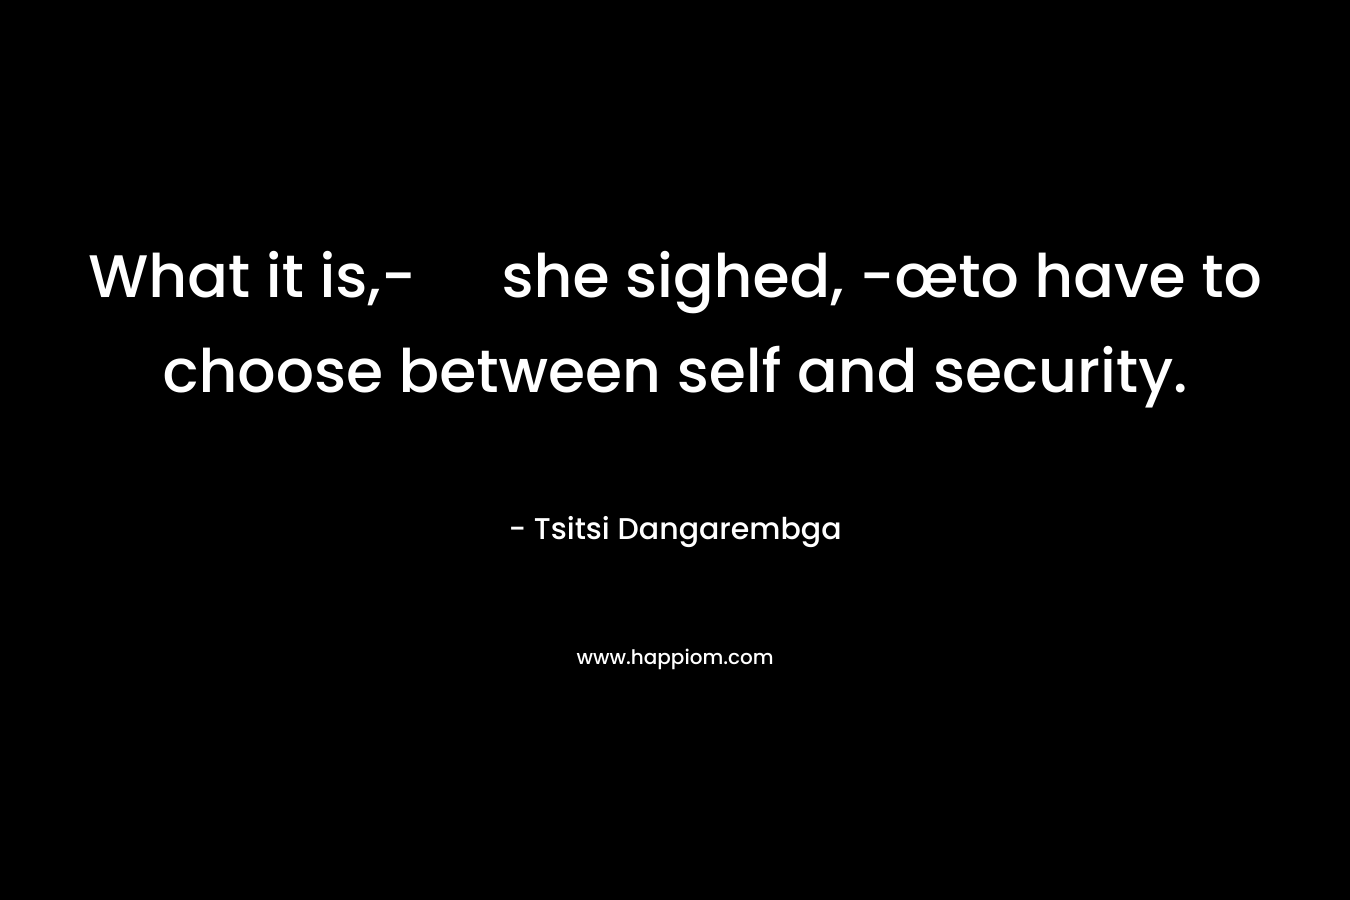 What it is,- she sighed, -œto have to choose between self and security. – Tsitsi Dangarembga